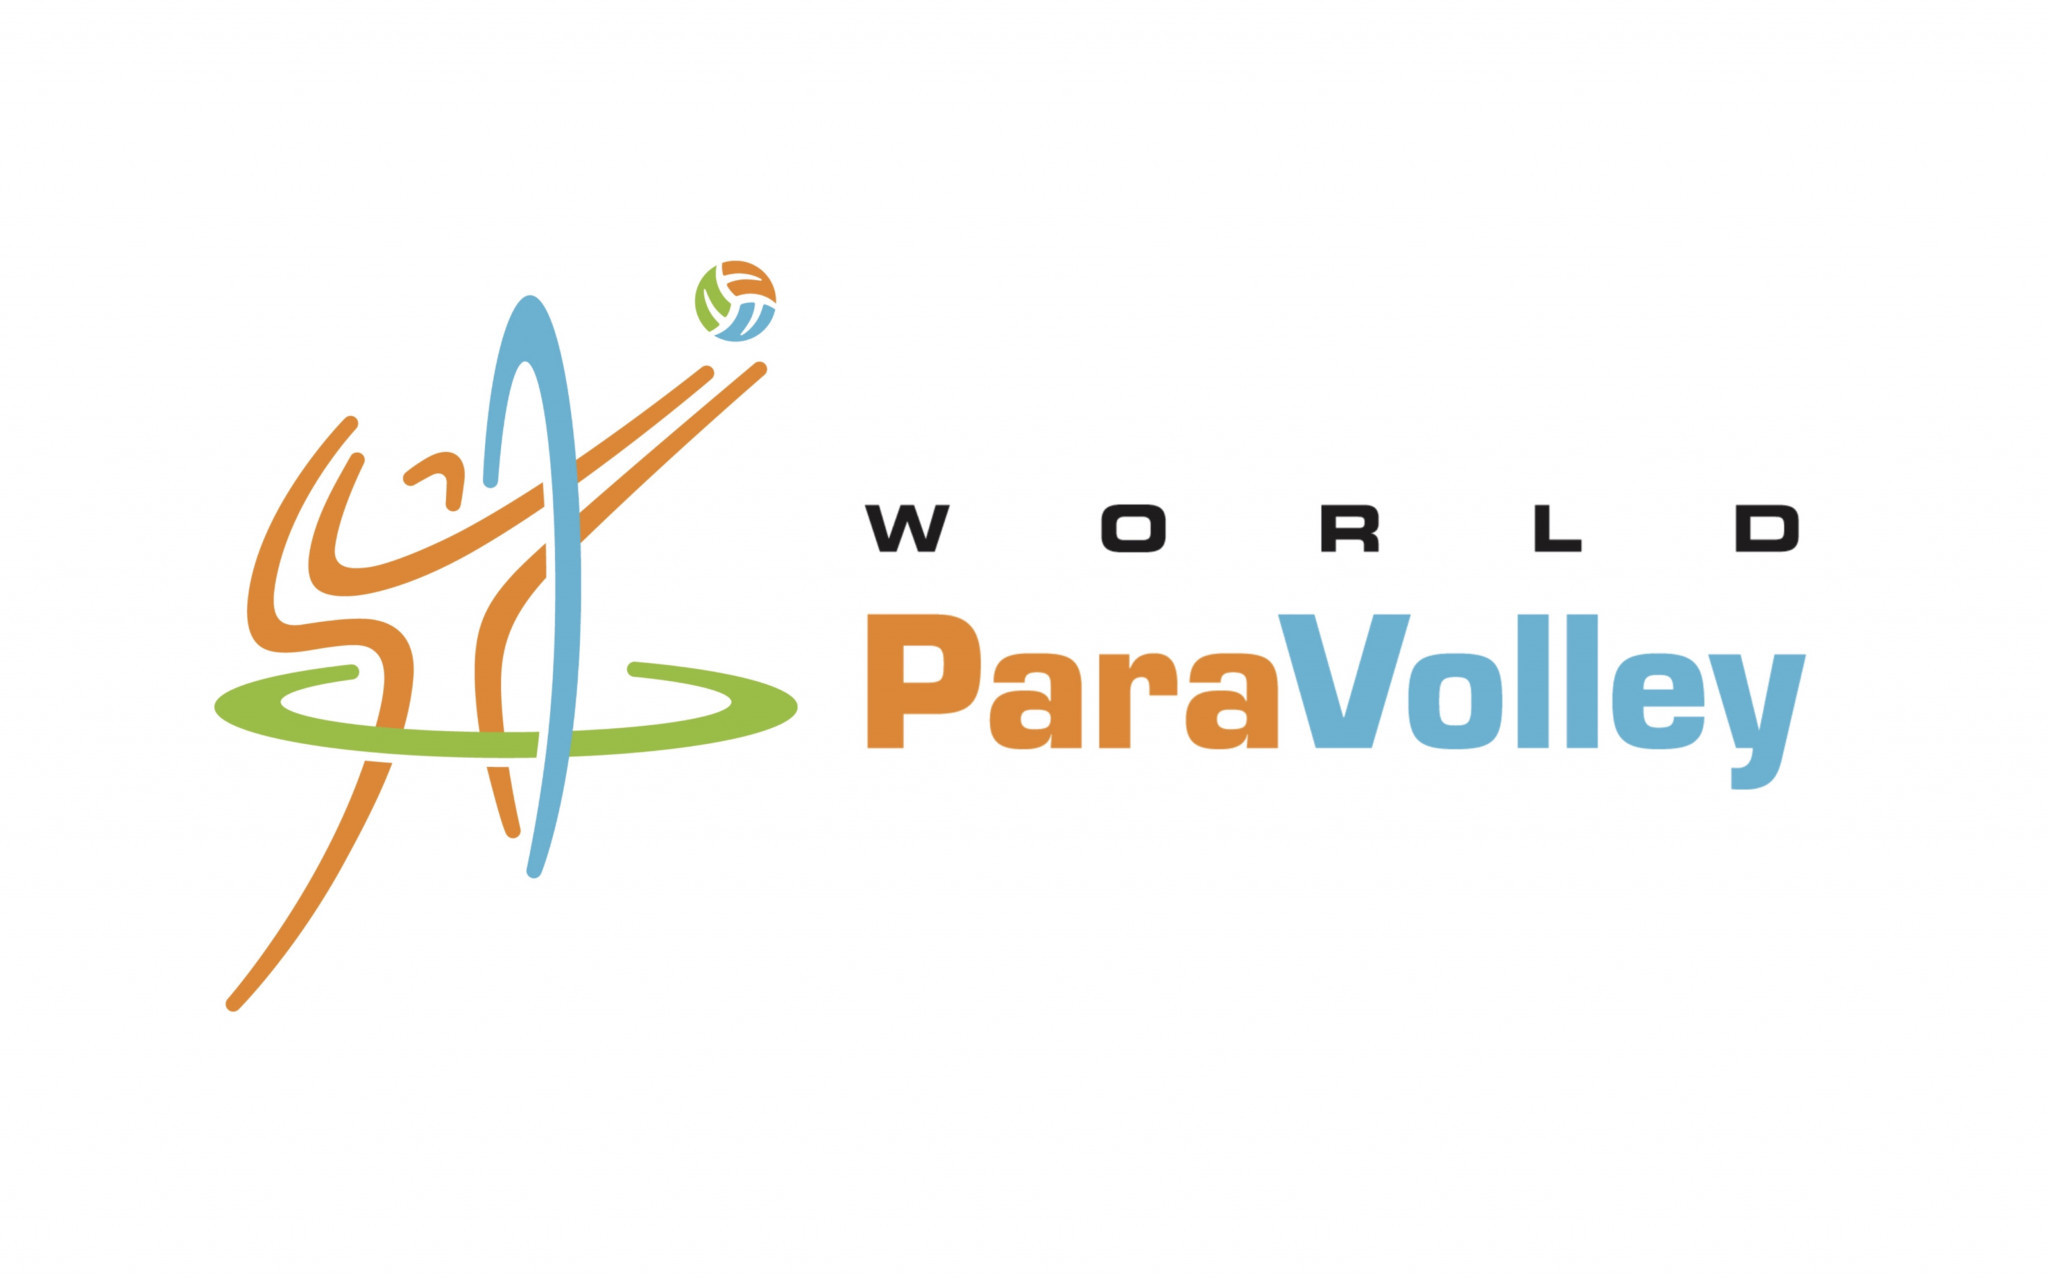 Final Tokyo 2020 men's sitting volleyball qualifier cancelled by World ParaVolley